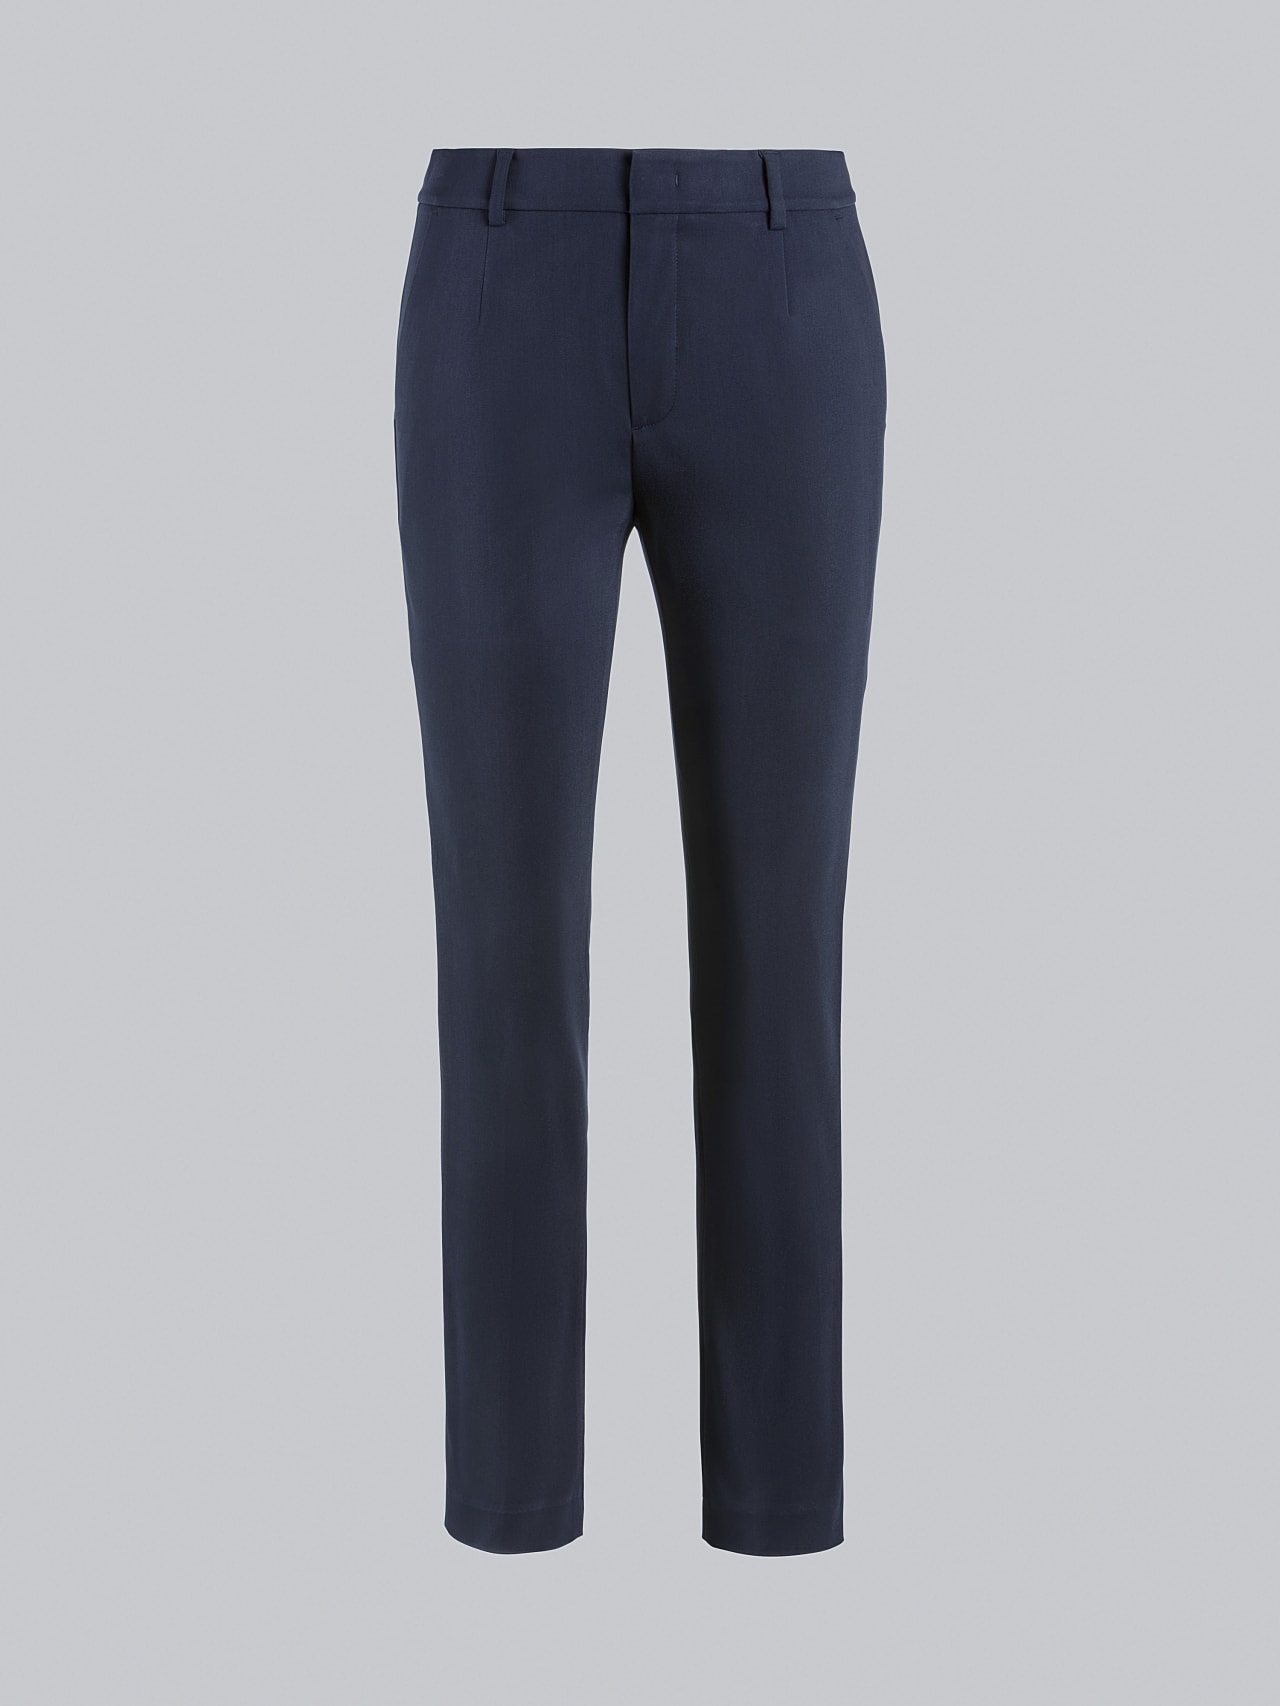 AlphaTauri | PERTI V1.Y5.02 | Slim-Fit Tapered Pants in navy for Women